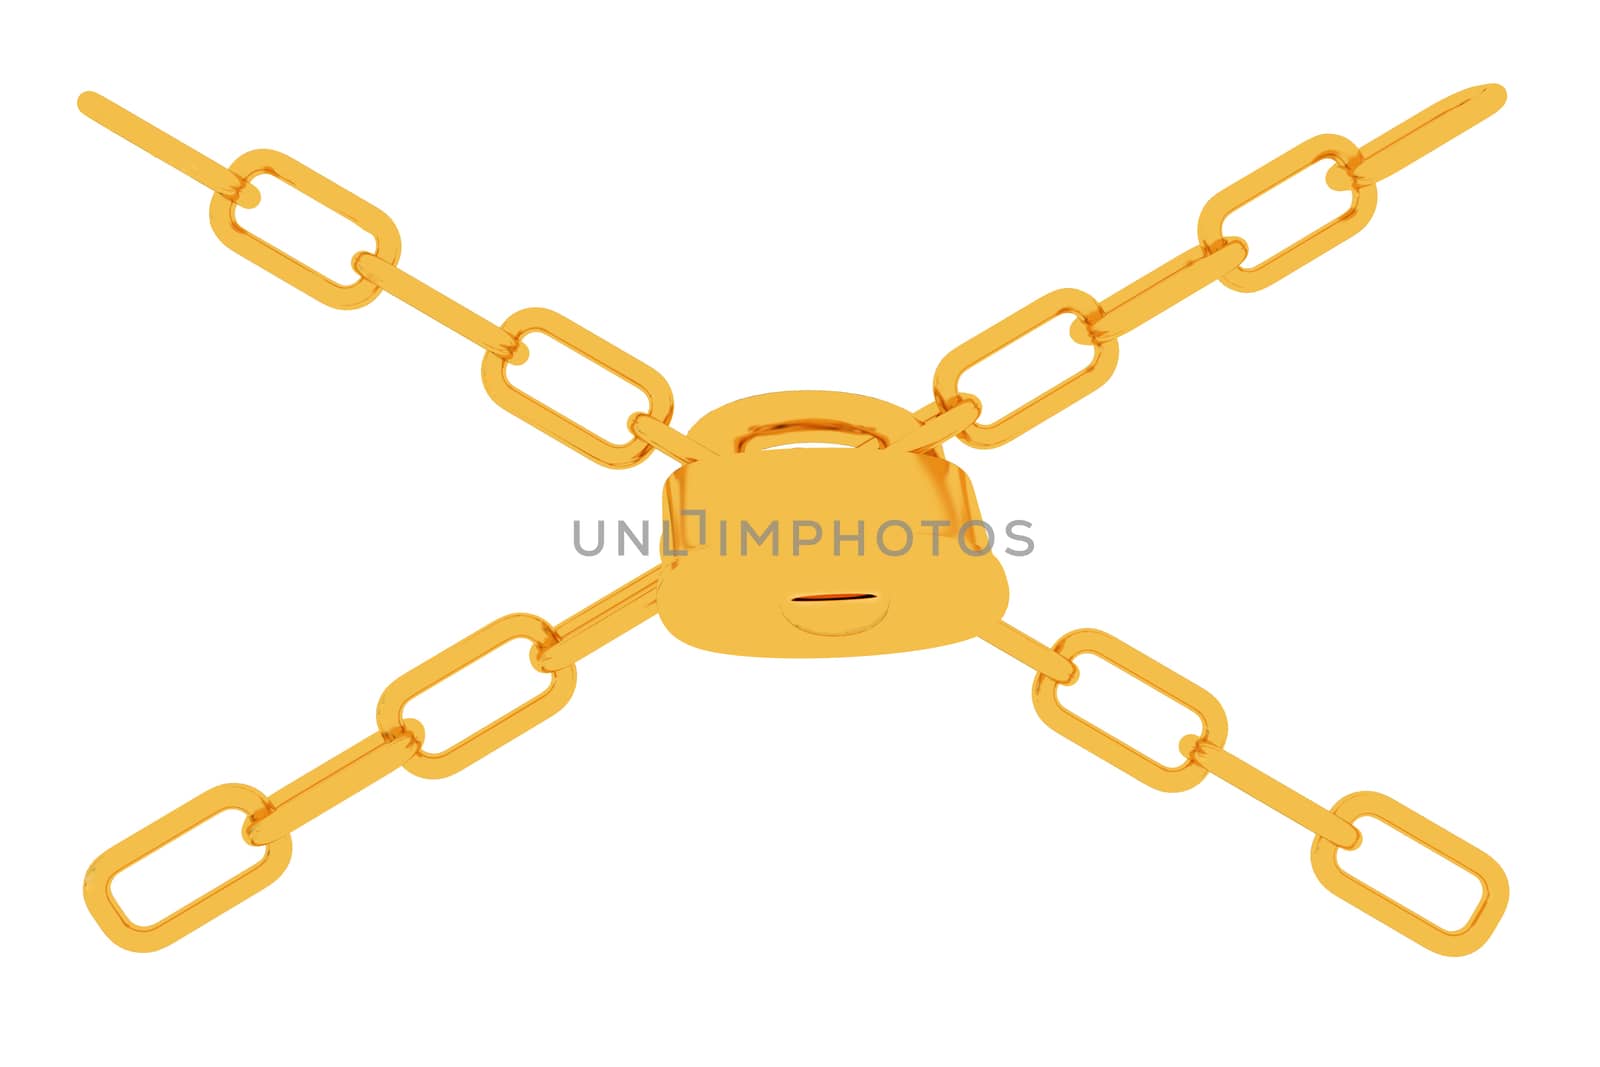 gold chains and padlock on white background - 3d illustration on a white background